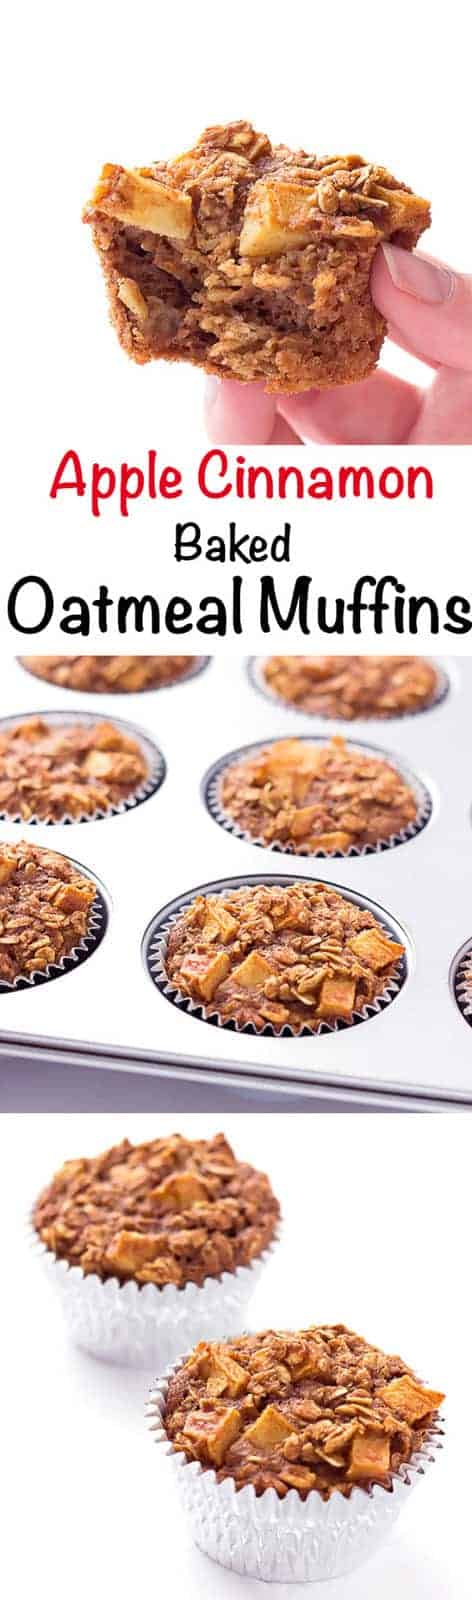 3 image collage with text showing Apple Cinnamon Baked Oatmeal Muffins